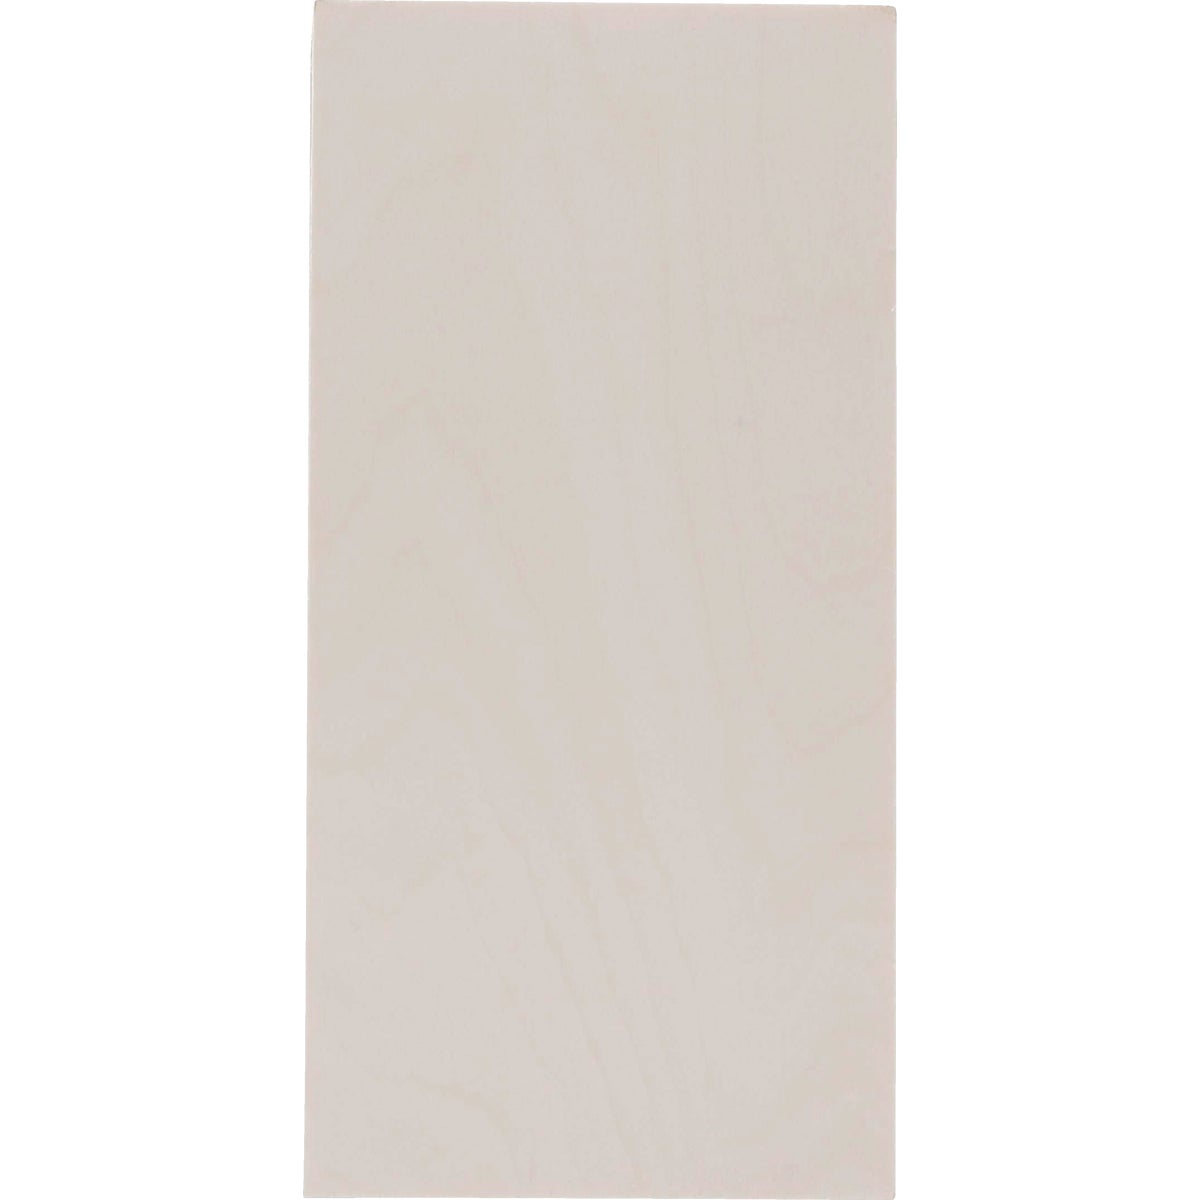 Midwest Products 1/8 In. x 6 In. x 12 In. Aspen Plywood